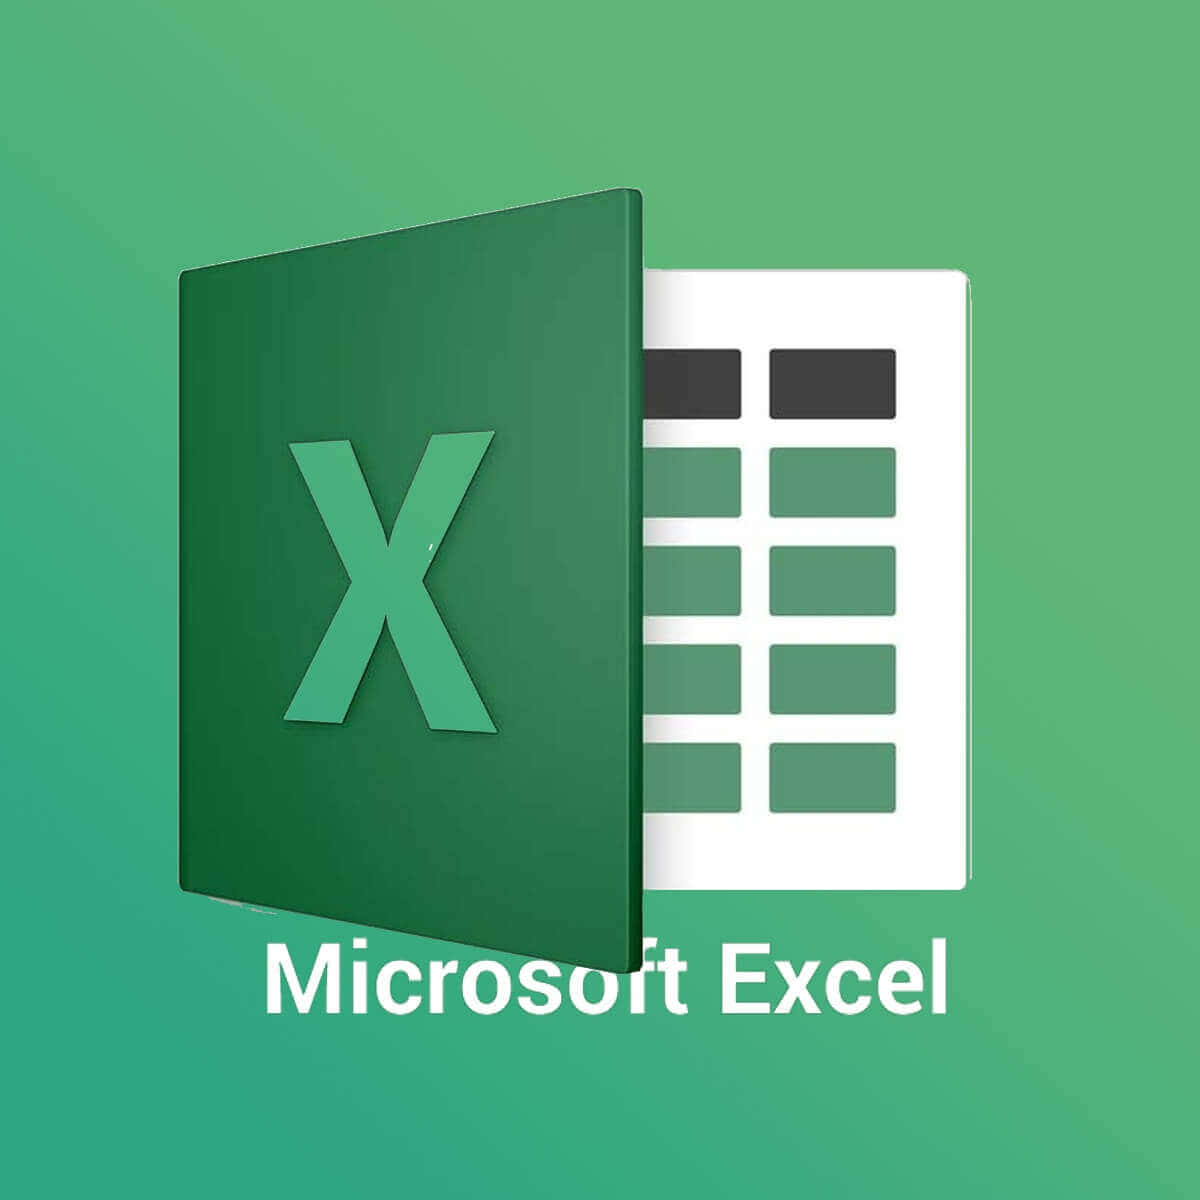 Microsoft Excel Logo With A Green Background